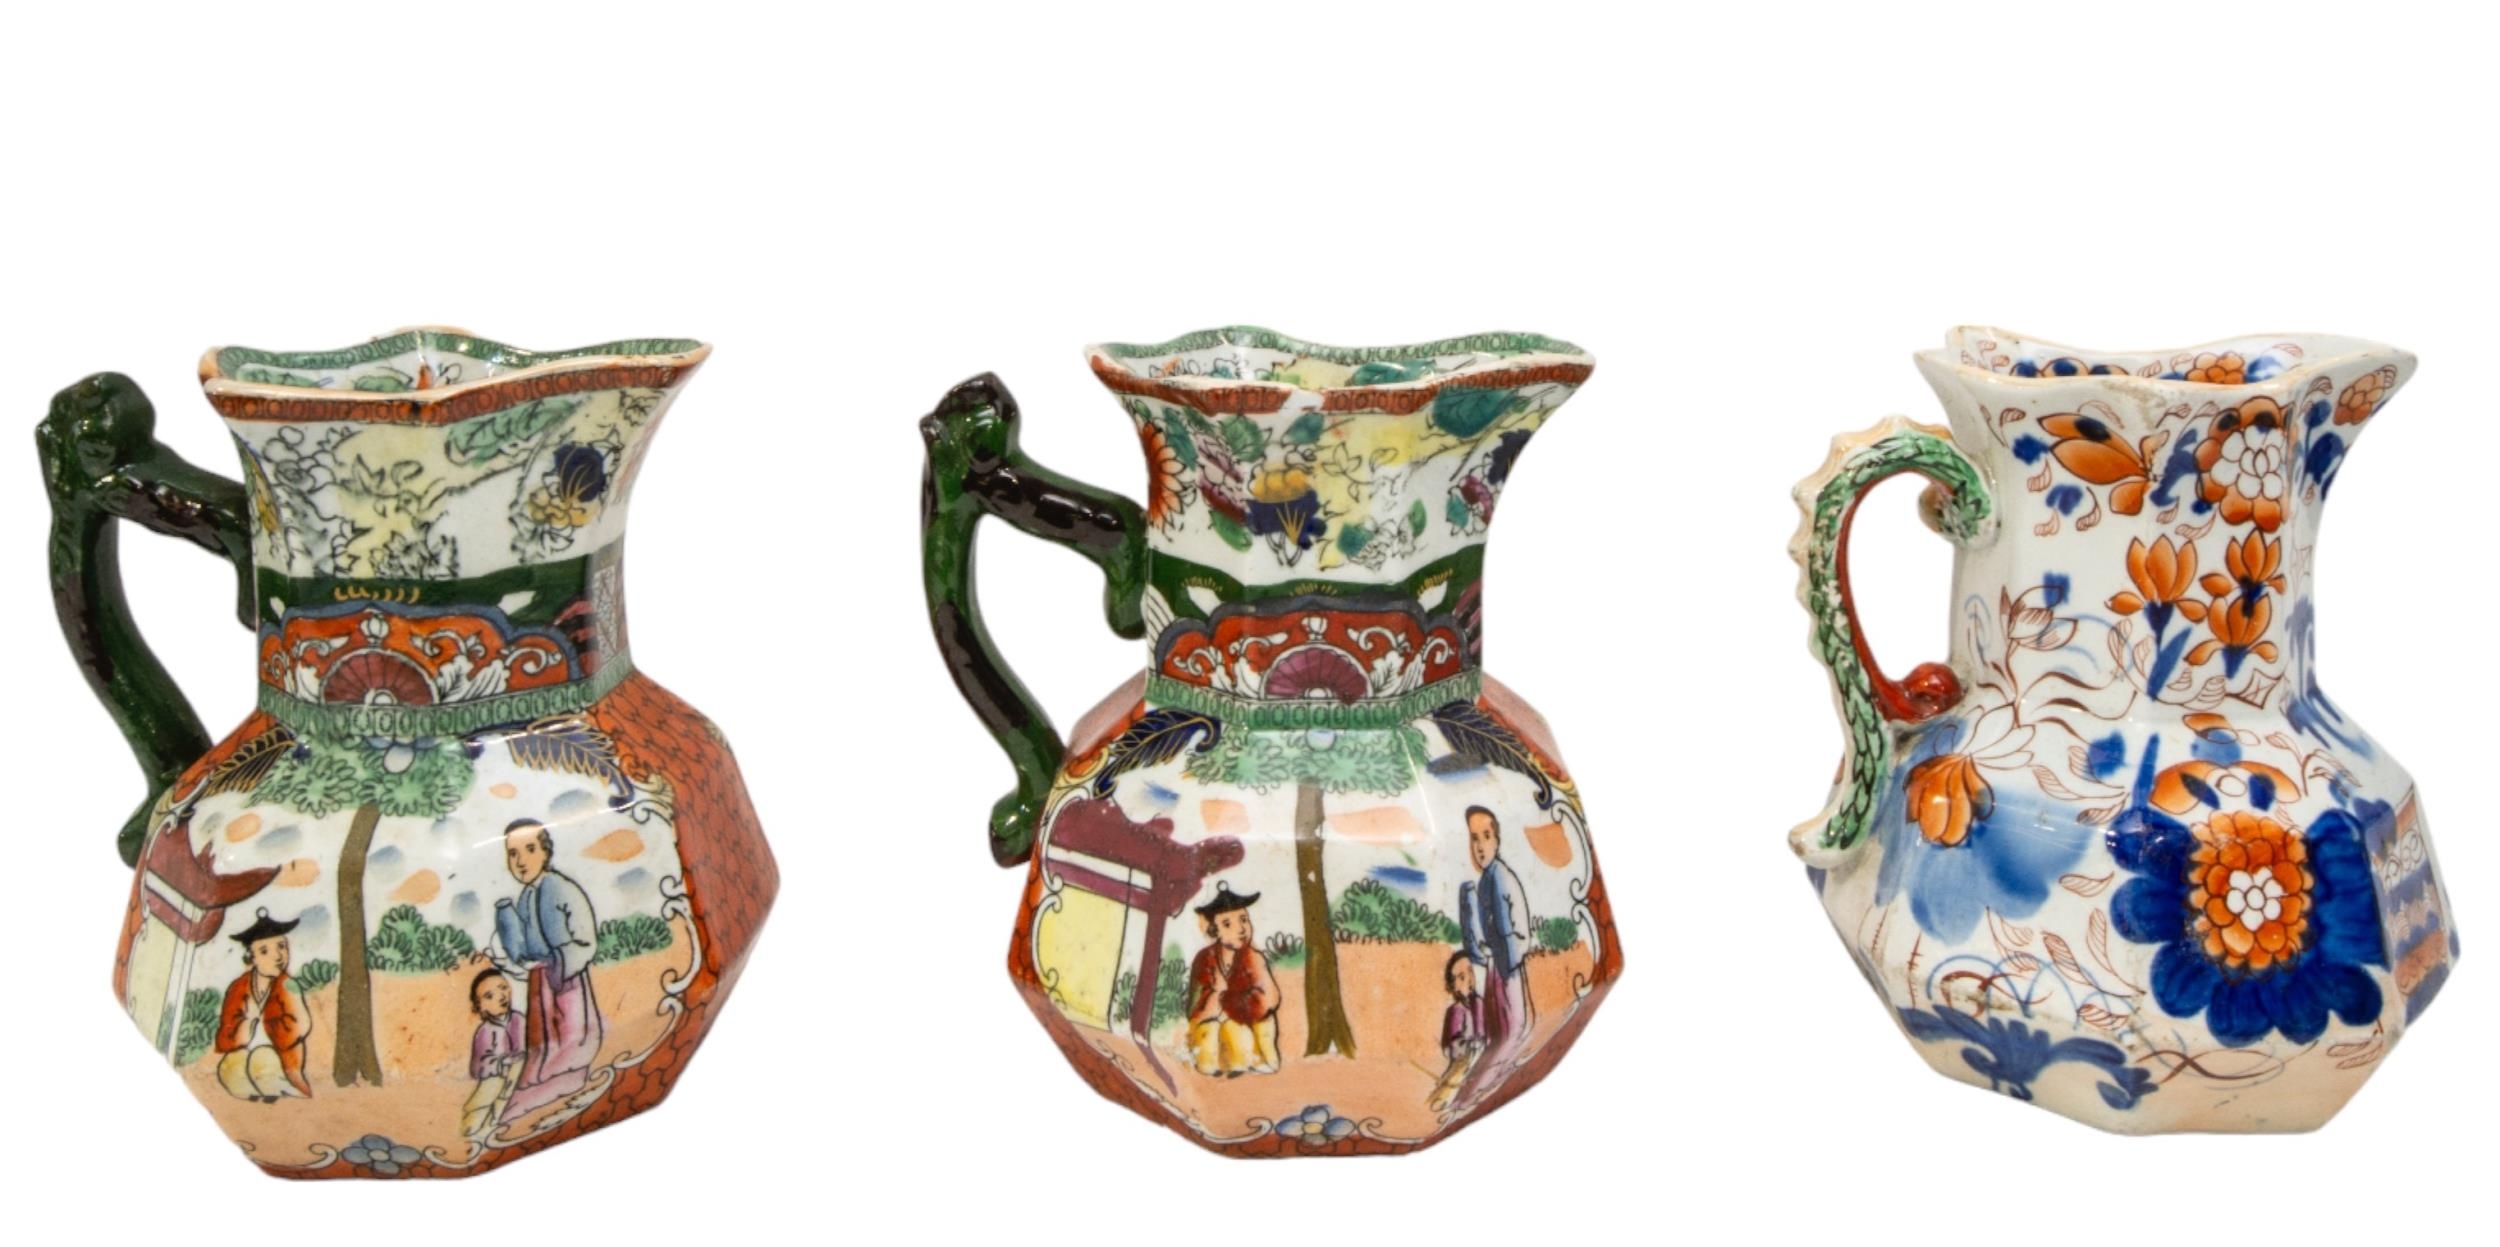 A MASON'S IRON STONE LOBED PITCHER, 19TH CENTURY, the sides decorated with scenes of courtiers in - Image 2 of 3